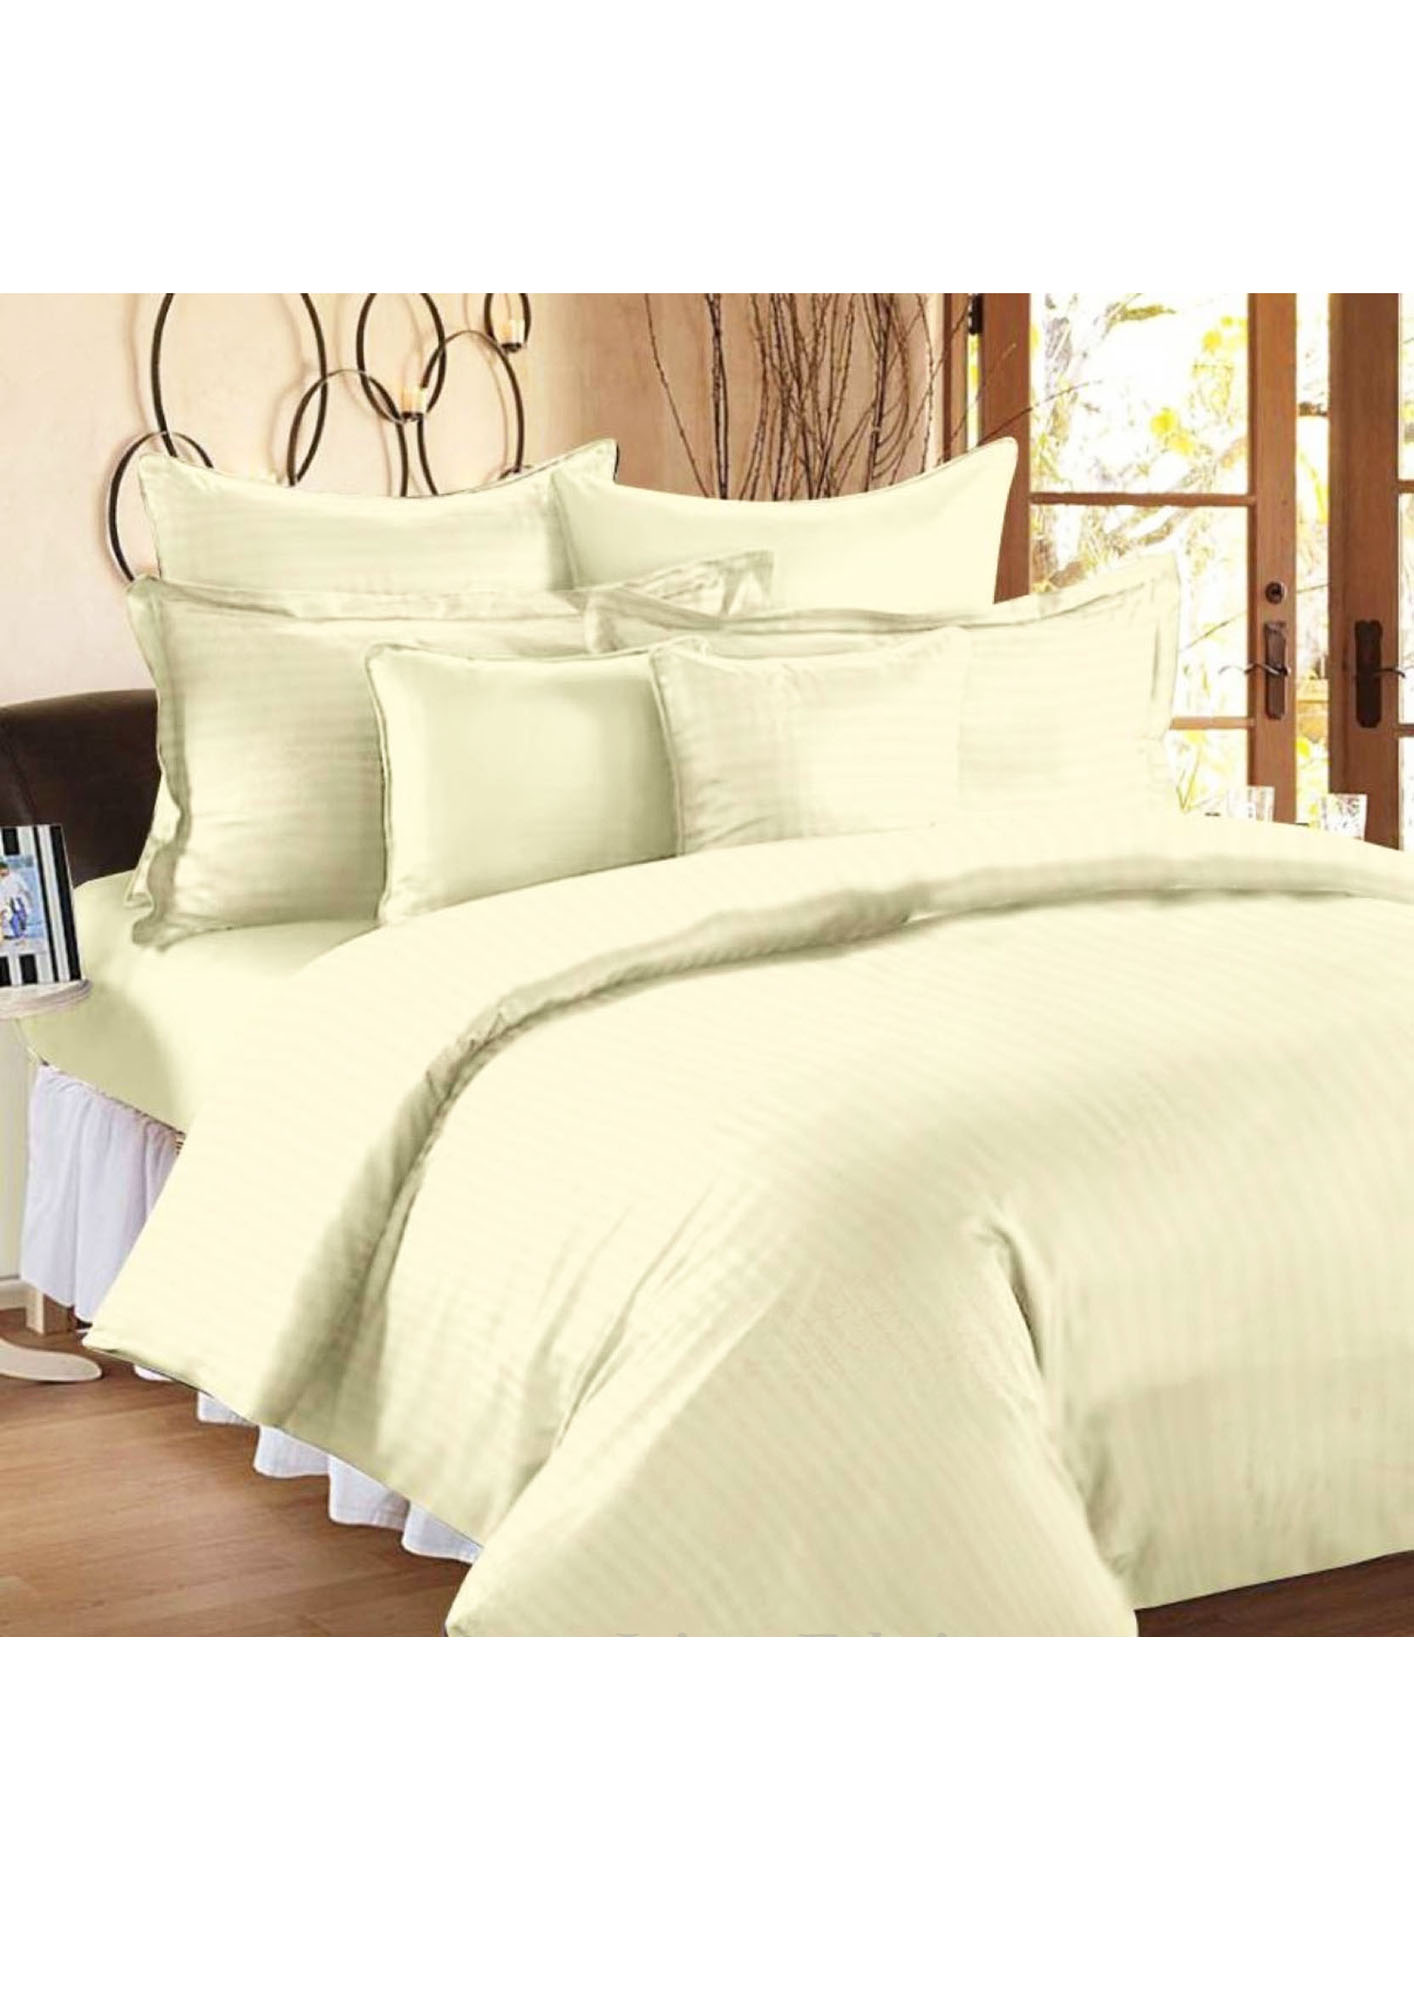 Awesome Off White Self Design 300 TC King Size Pure Cotton Premium Satin Slumber Sheet for Double Be